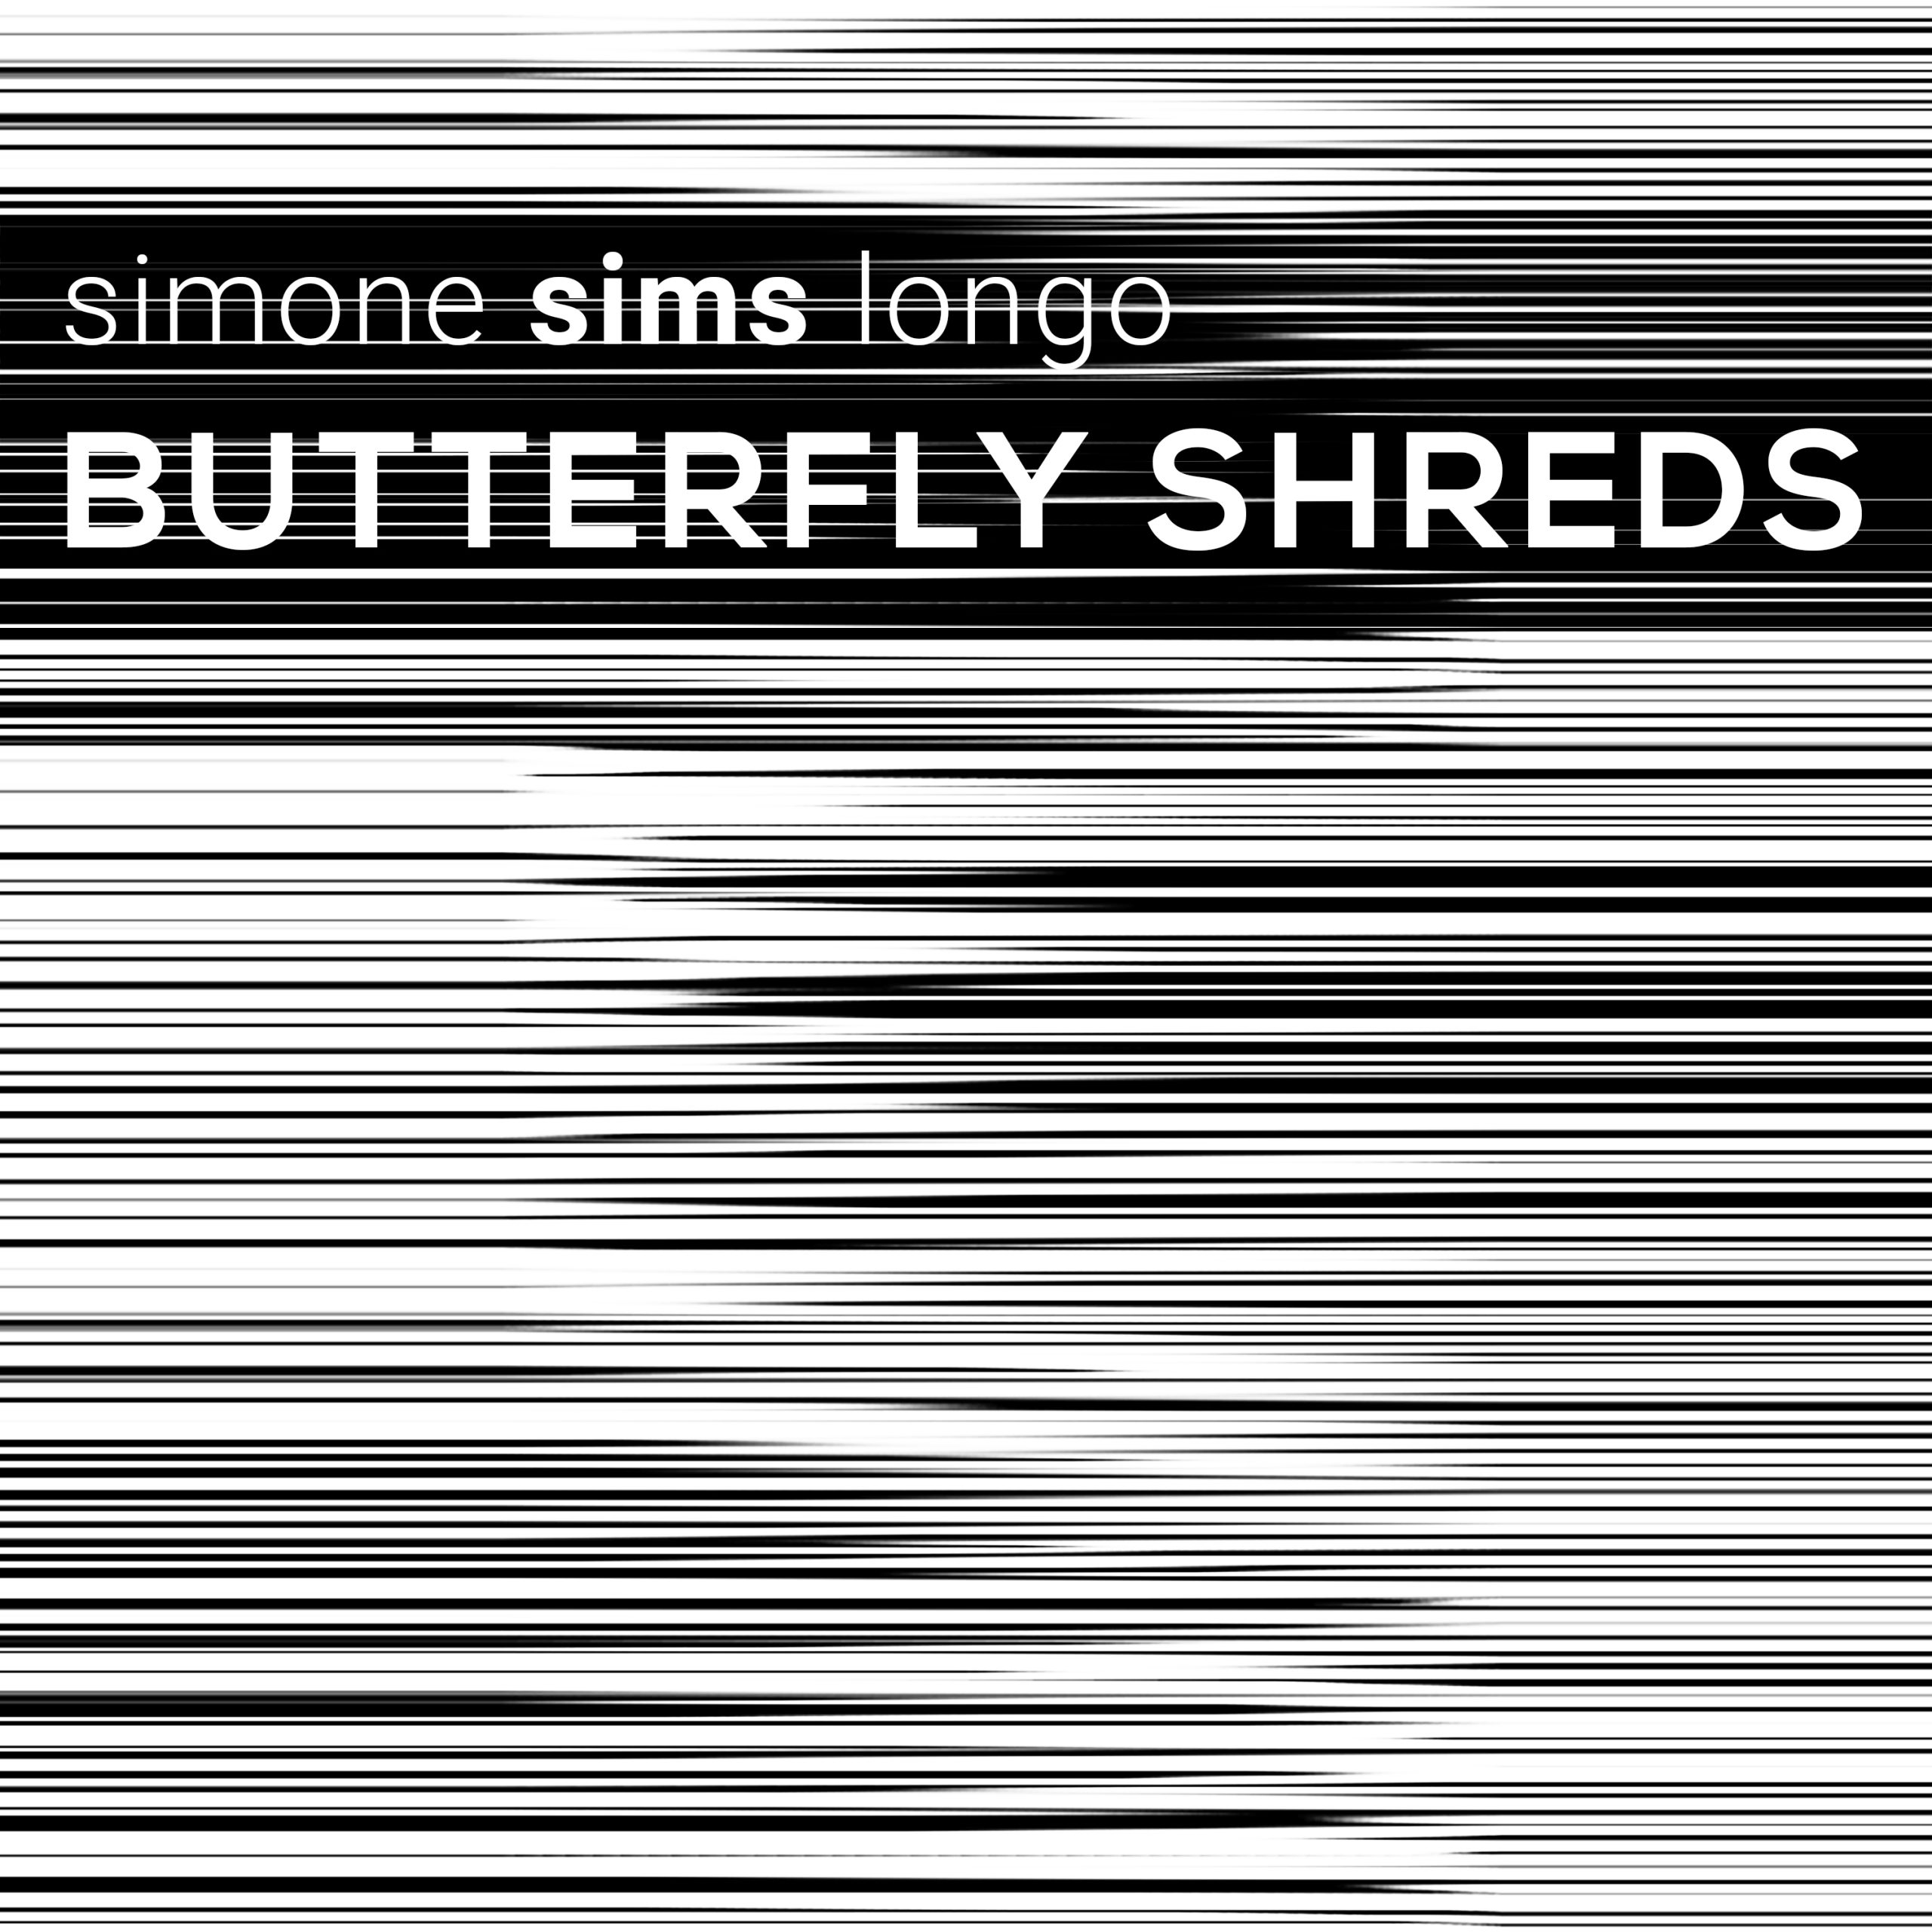 Butterfly-shreds-COVER